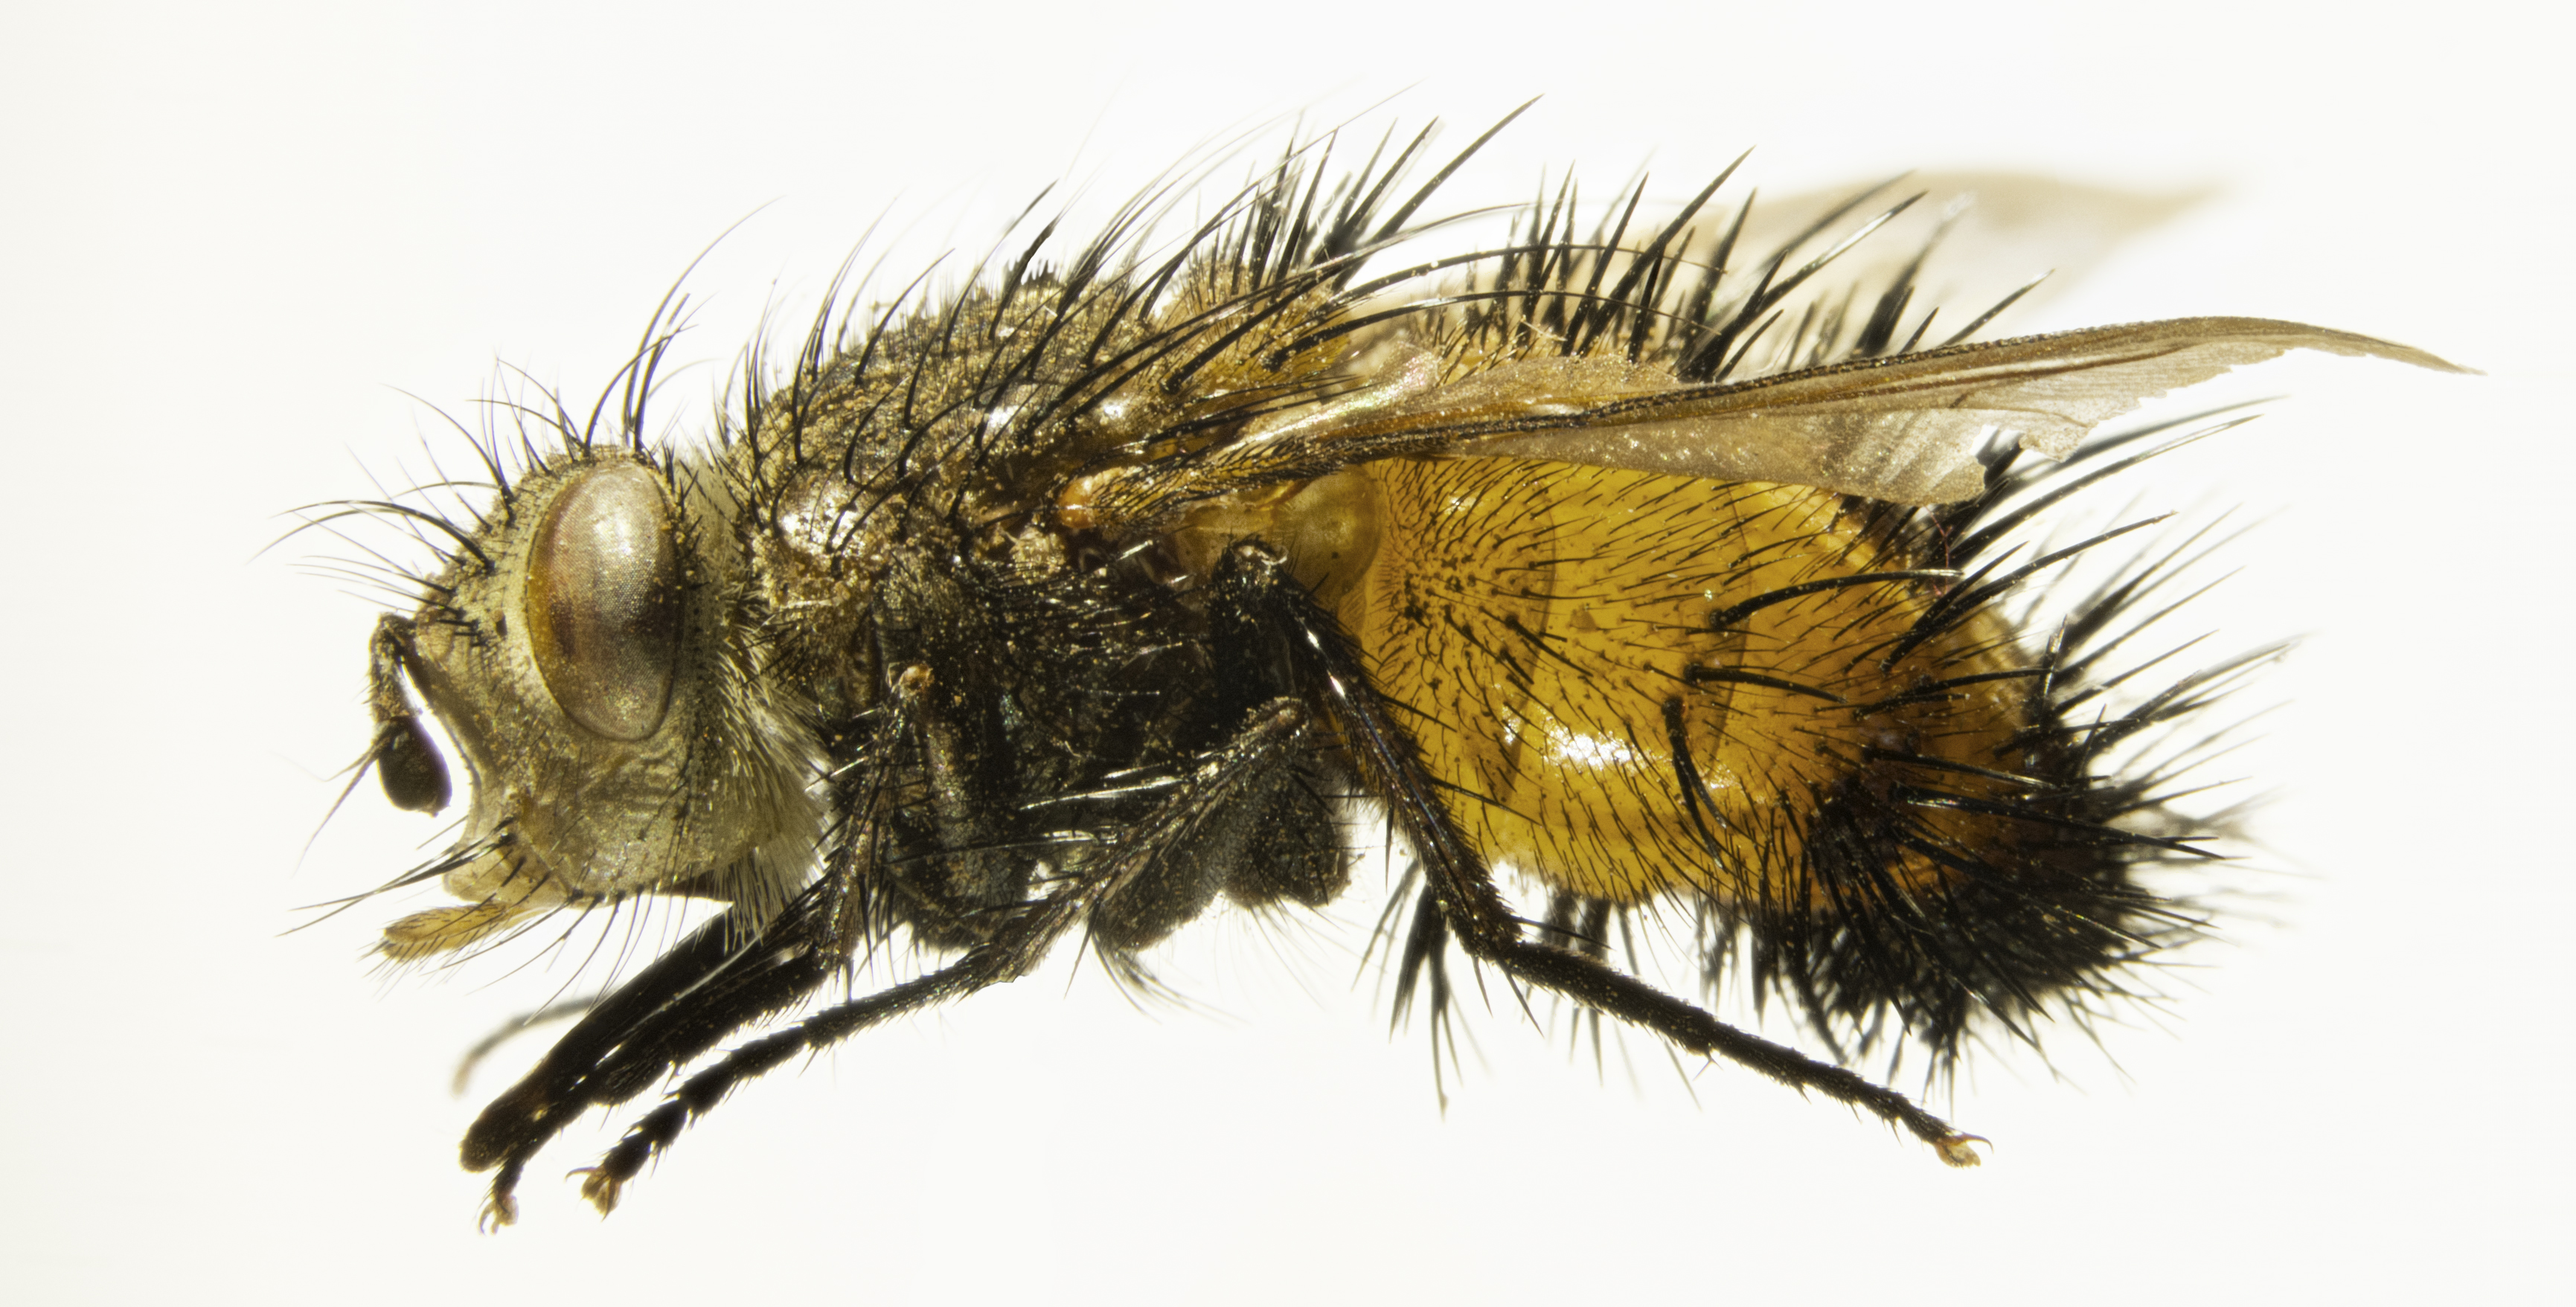 10 XII 2014 – Four-eyed beetles and spiky, parasitic flies